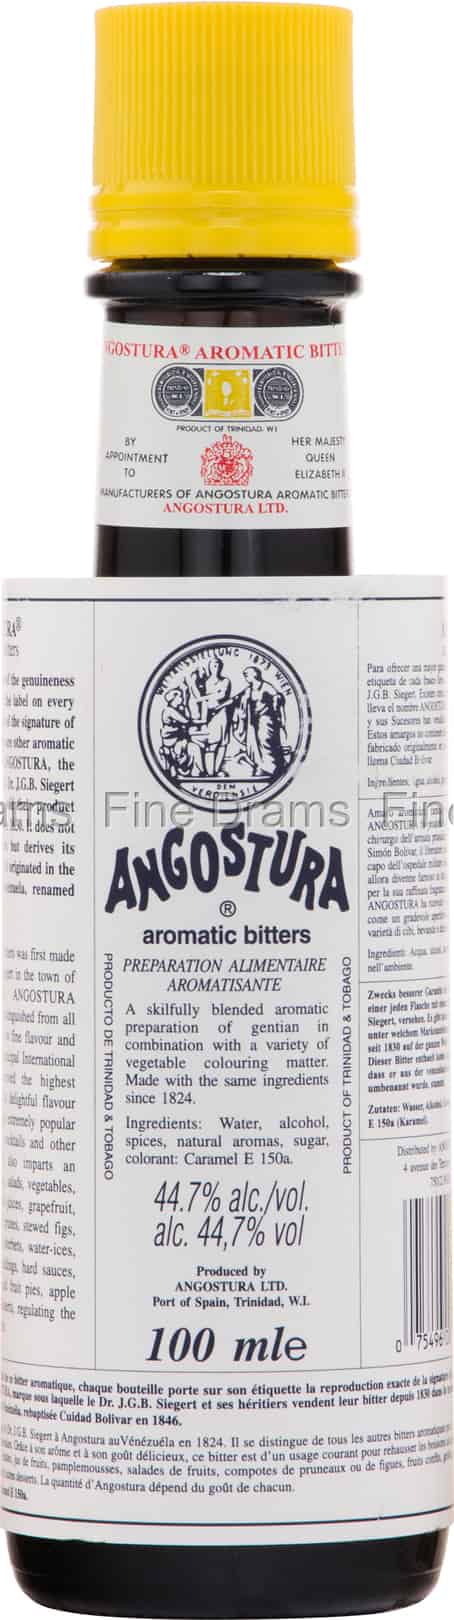 Aromatic Angostura Bitters cl) (10